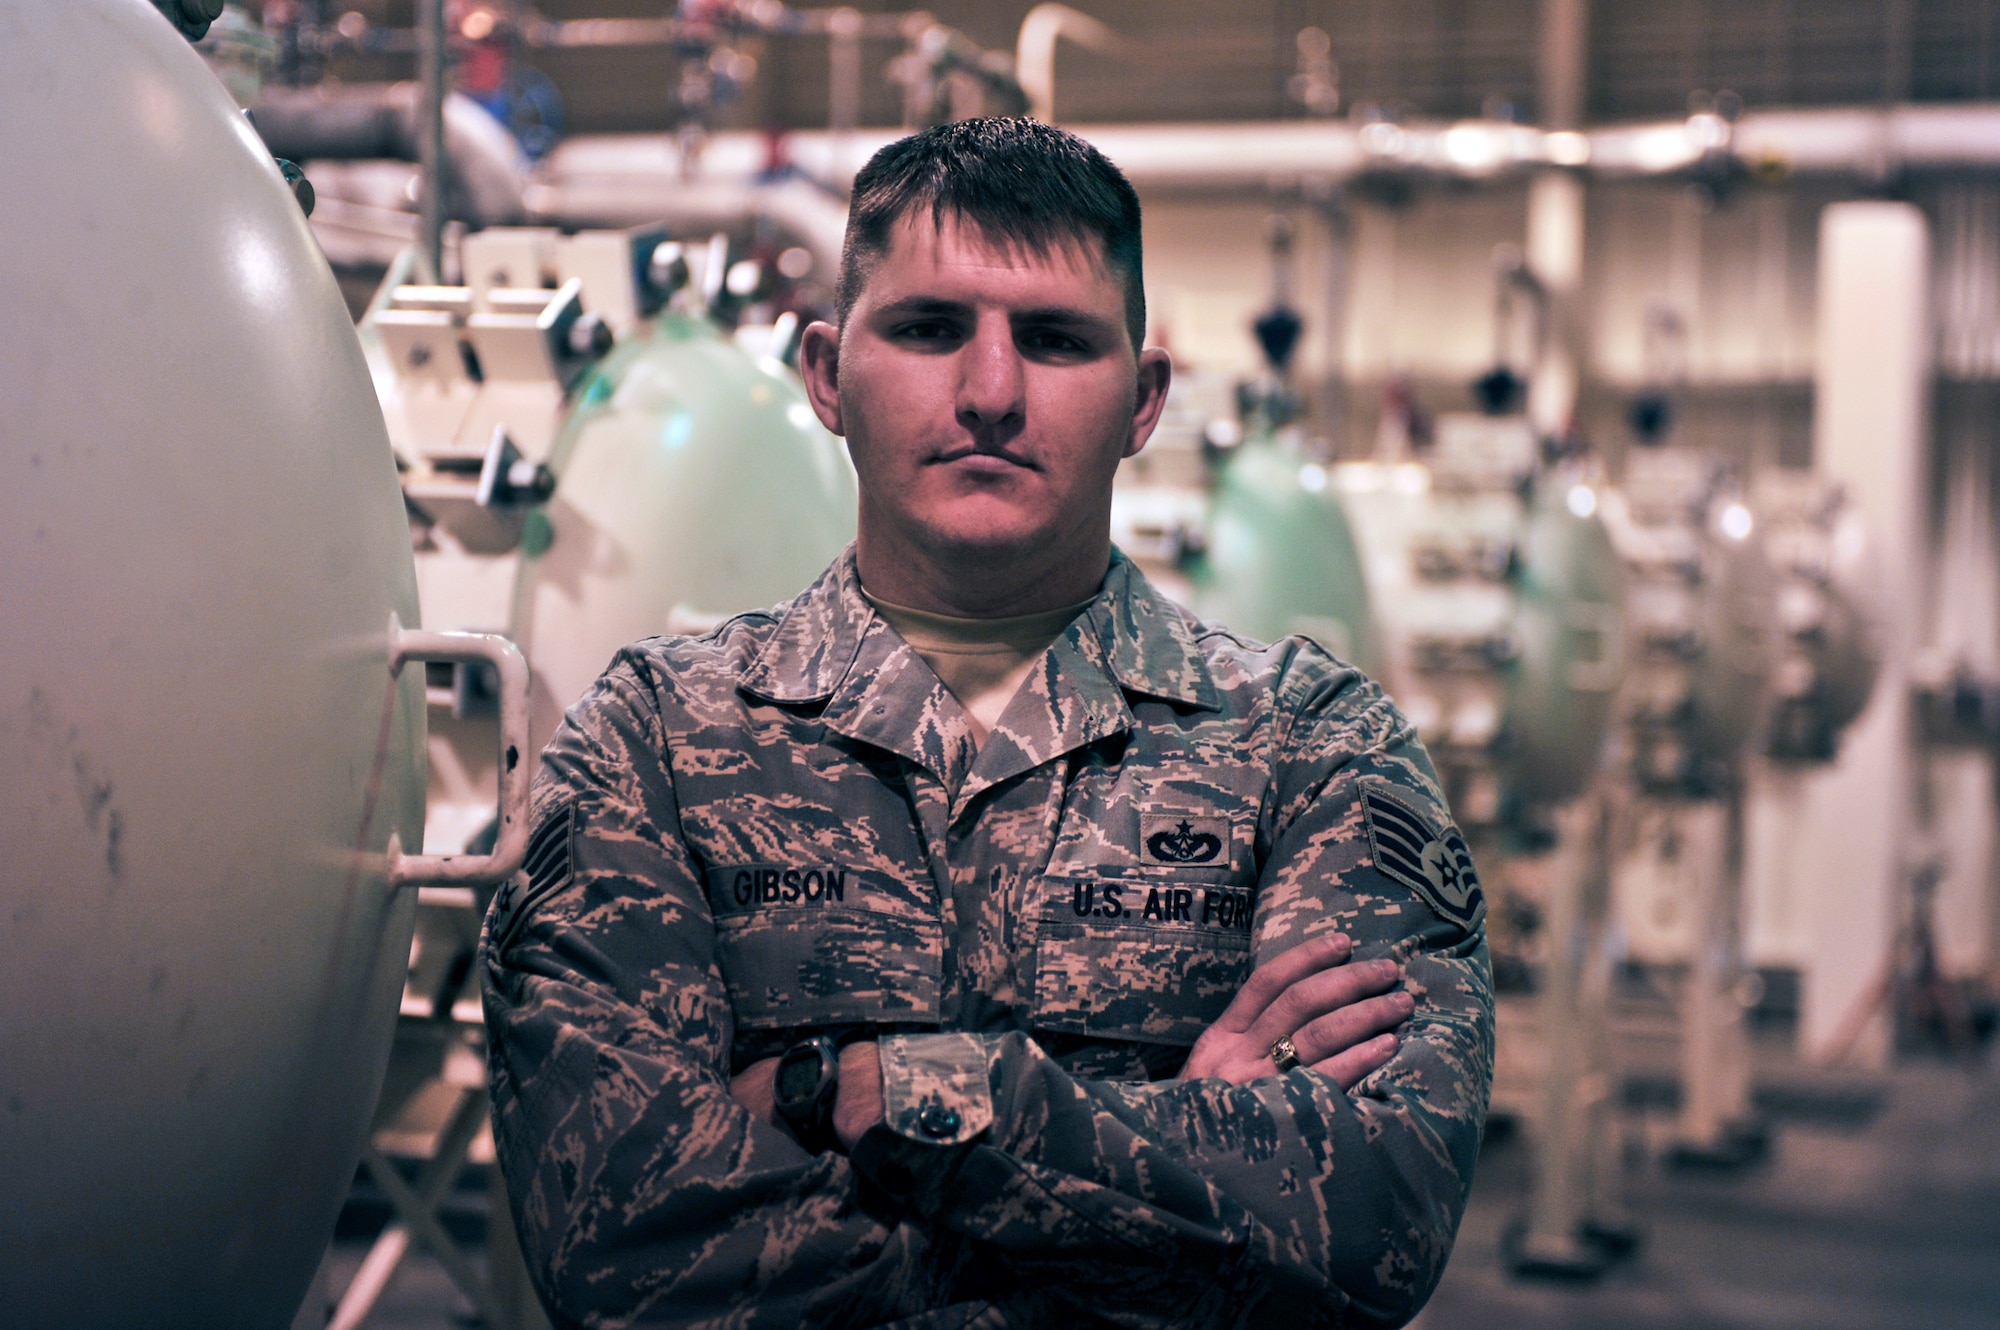 ELMENDORF AIR FORCE BASE, Alaska – Staff Sgt. Jacob Gibson is part of the 3rd Civil Engineer Squadron. He helps work on the storage units, tanks and pipelines that transport fuel. (Air Force photo by Airman 1st Class Christopher Gross)